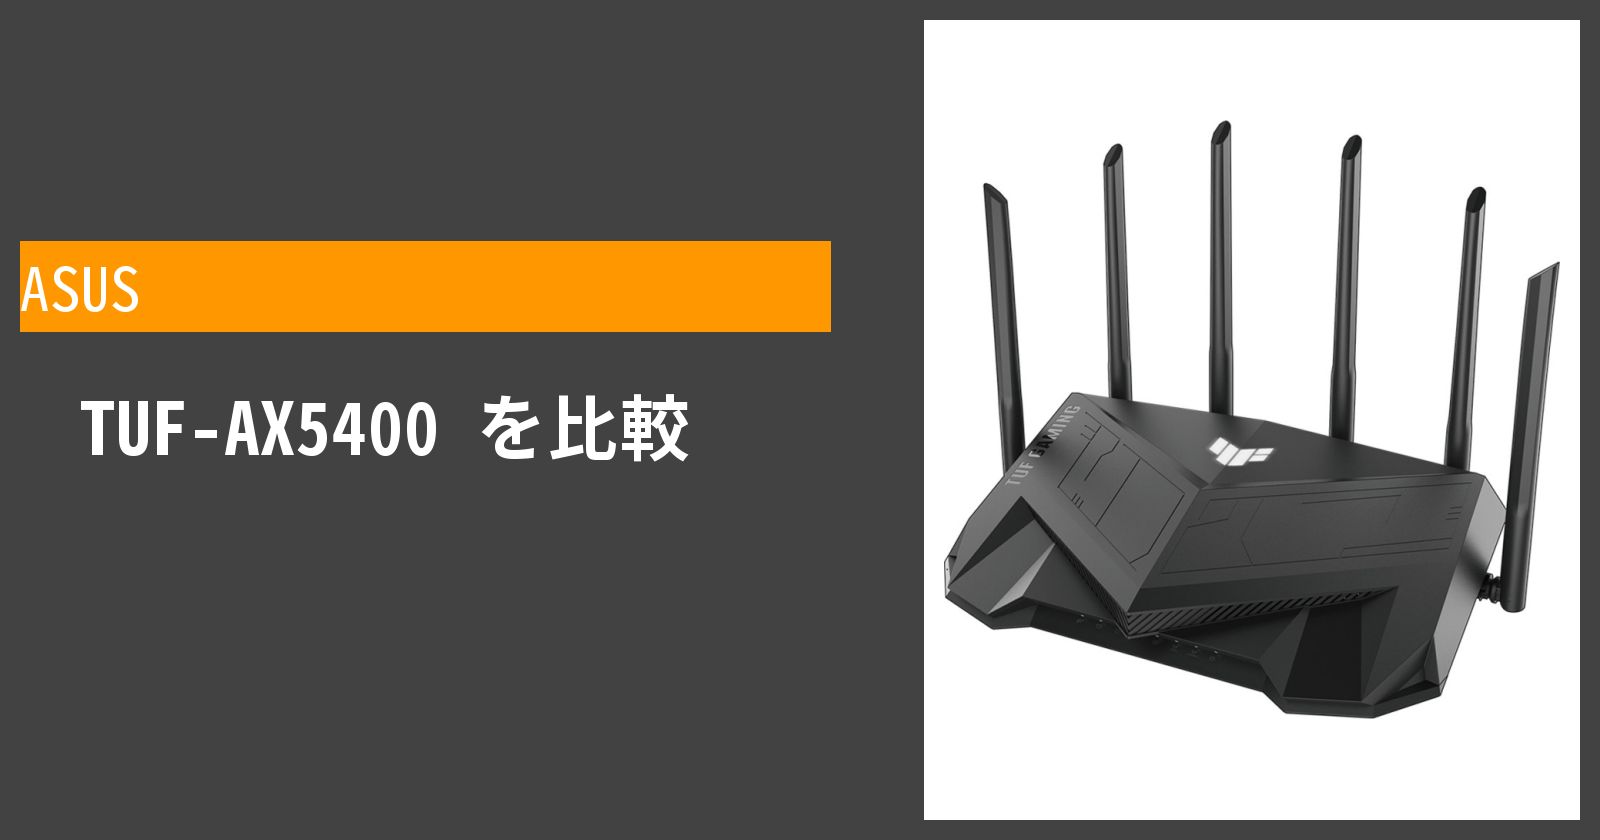  ASUS TUF-AX5400 (2021) を徹底評価